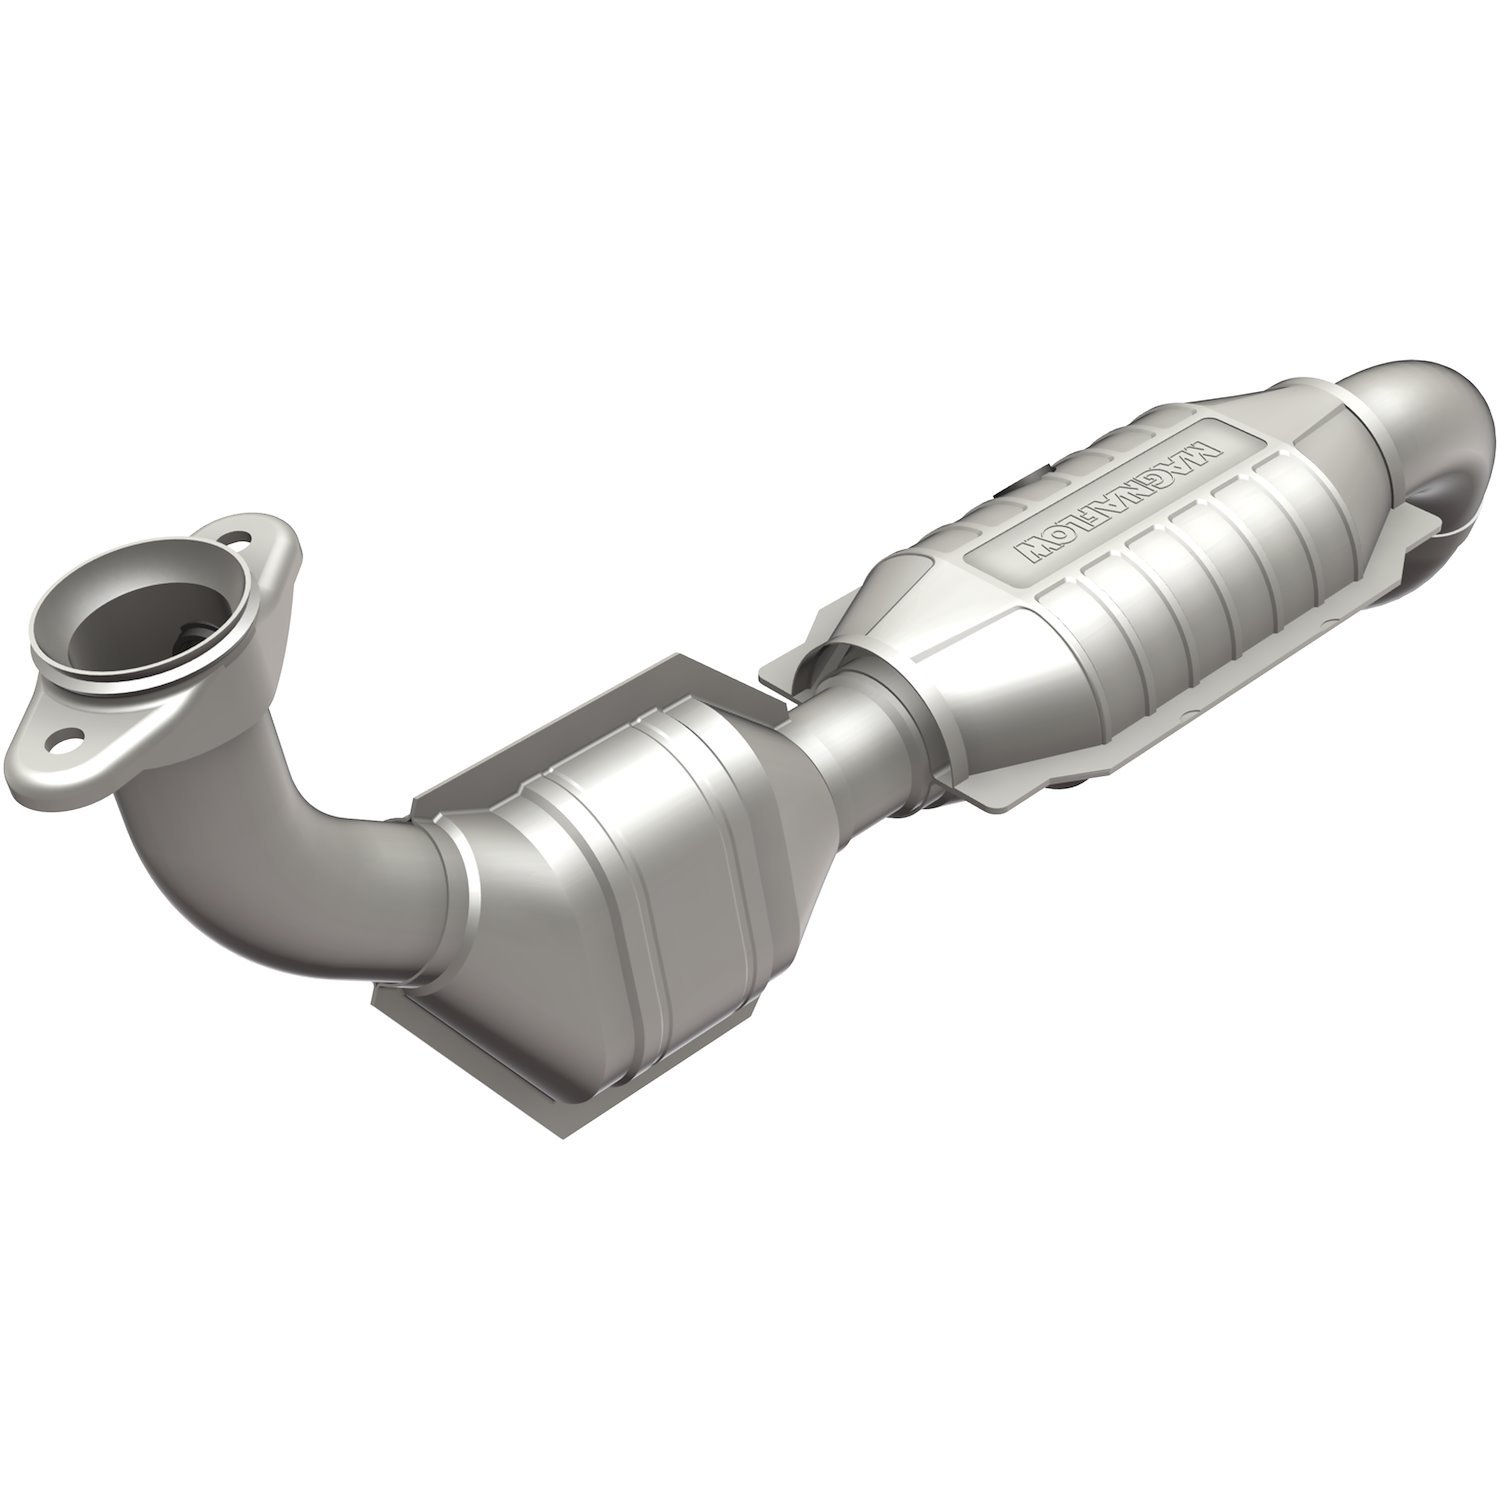 OEM Grade Federal / EPA Compliant Direct-Fit Catalytic Converter 51238